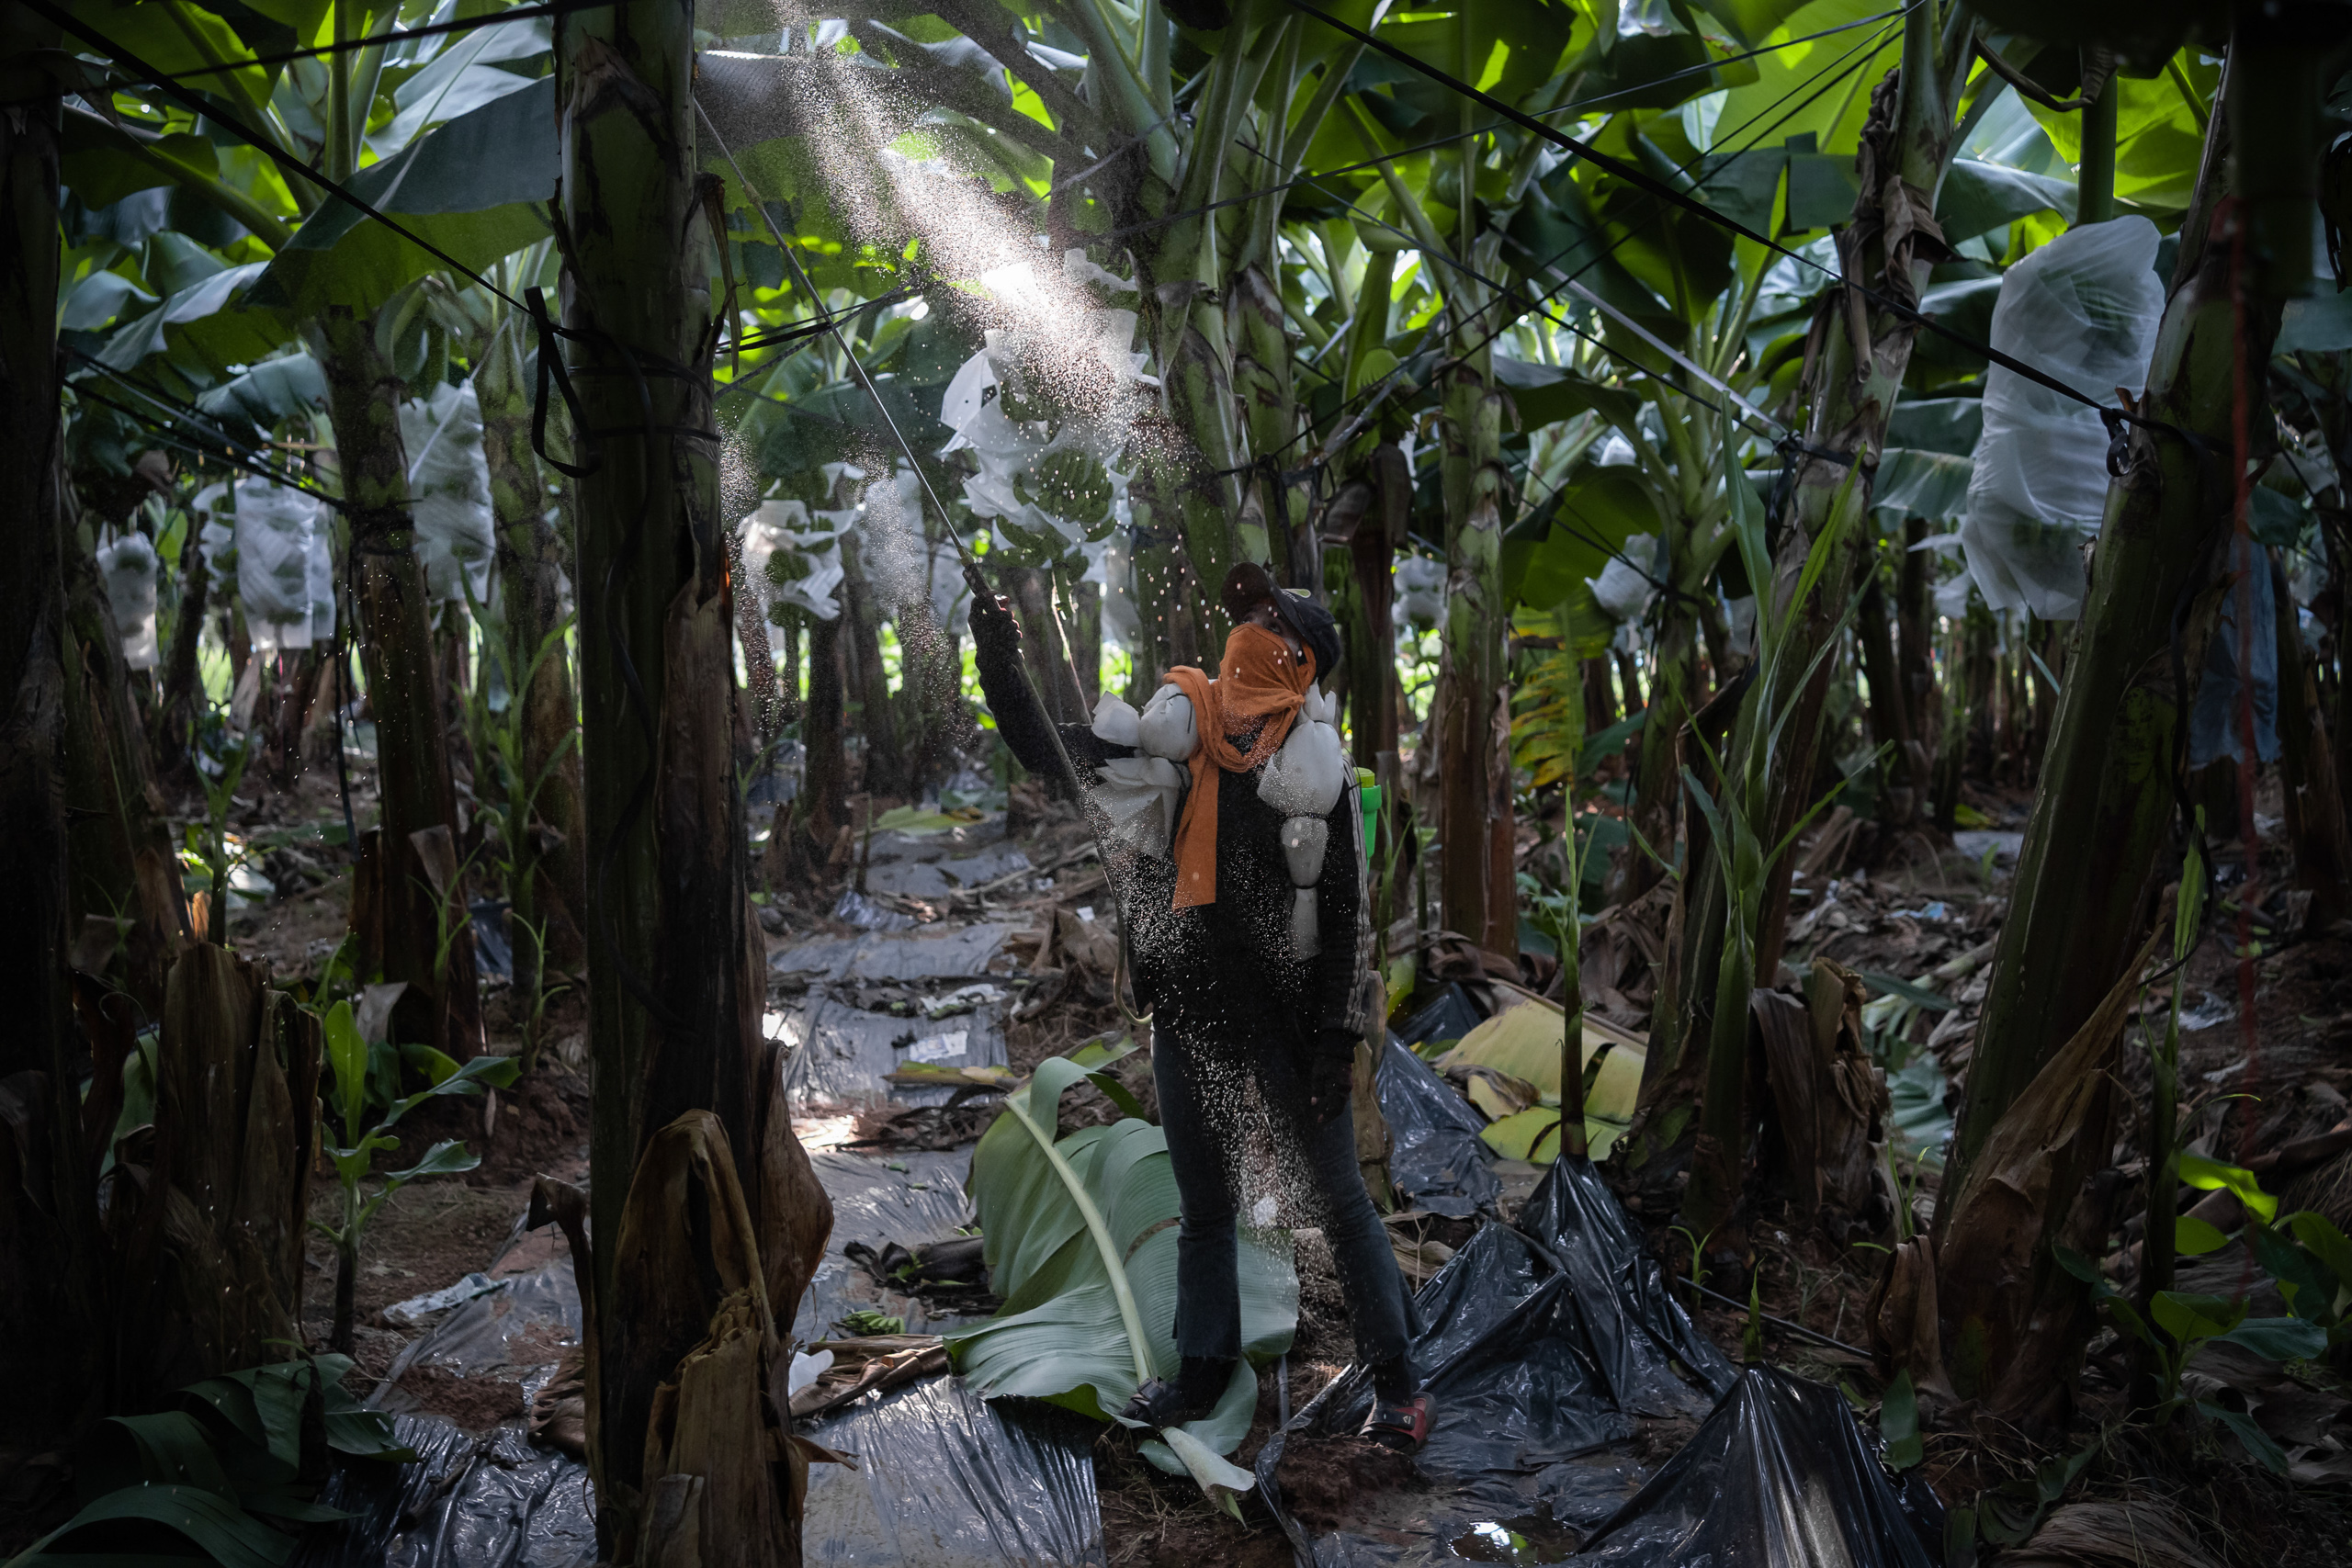 A worker sprays a mixture of fertiliser and pesticides on banana trees in Cambodia’s Kampot province